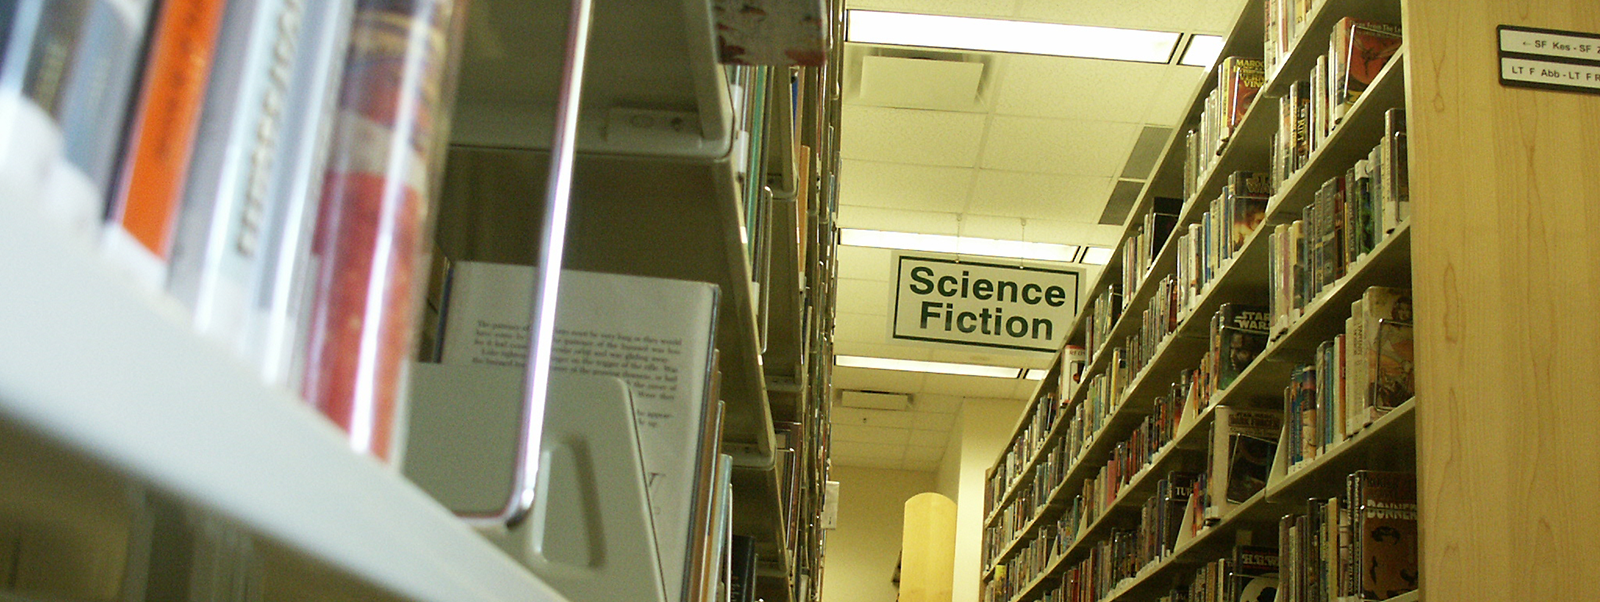 Clark County Library Services